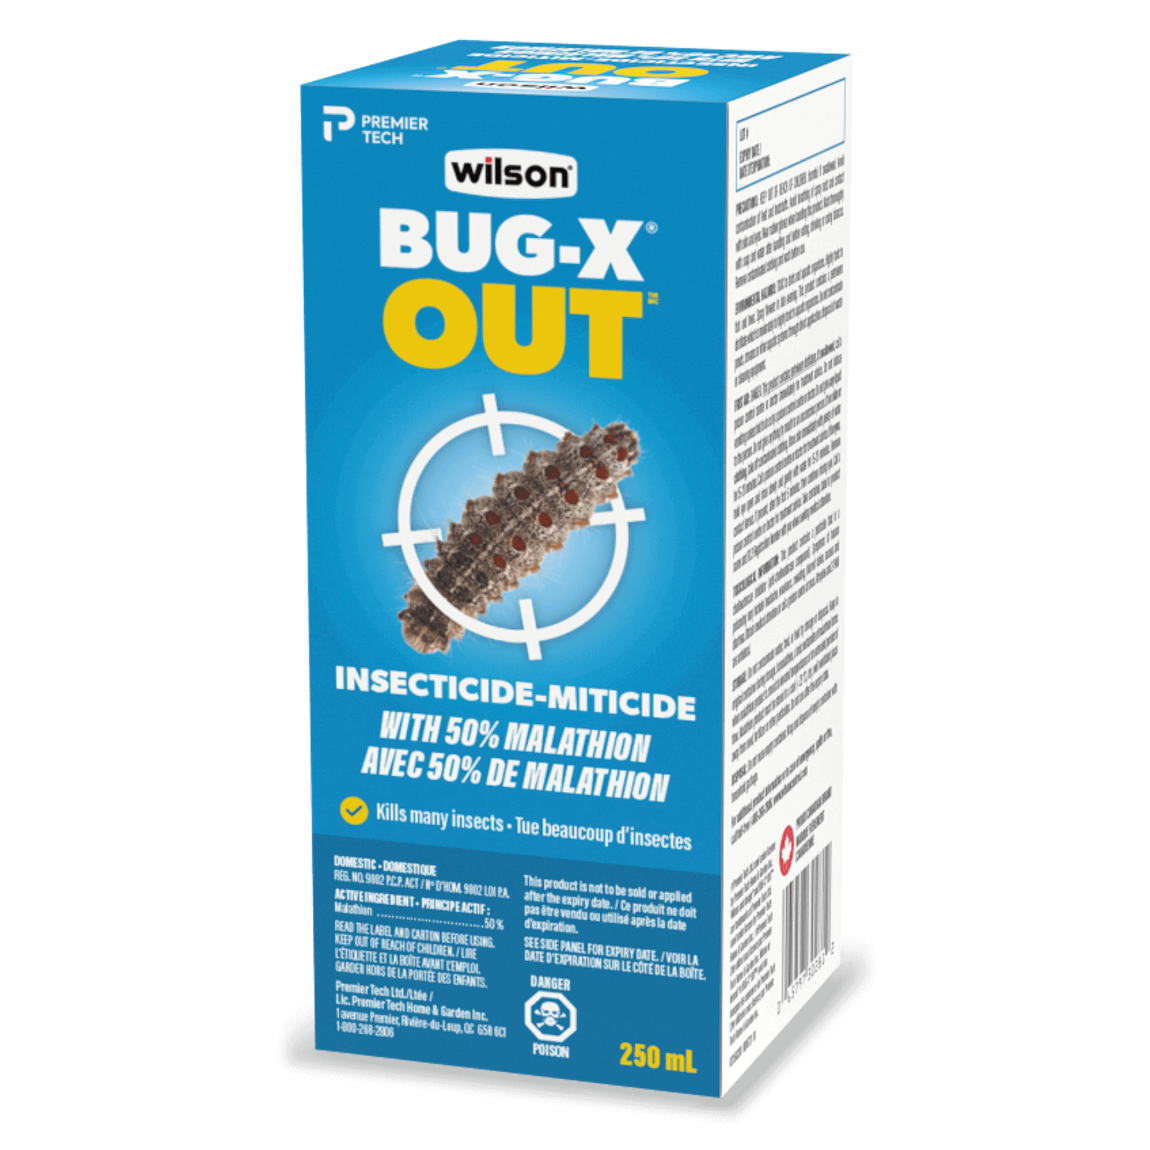 BUG-X OUT Insecticide Miticide is a broad-spectrum insecticide spray controlling more than 20 insects